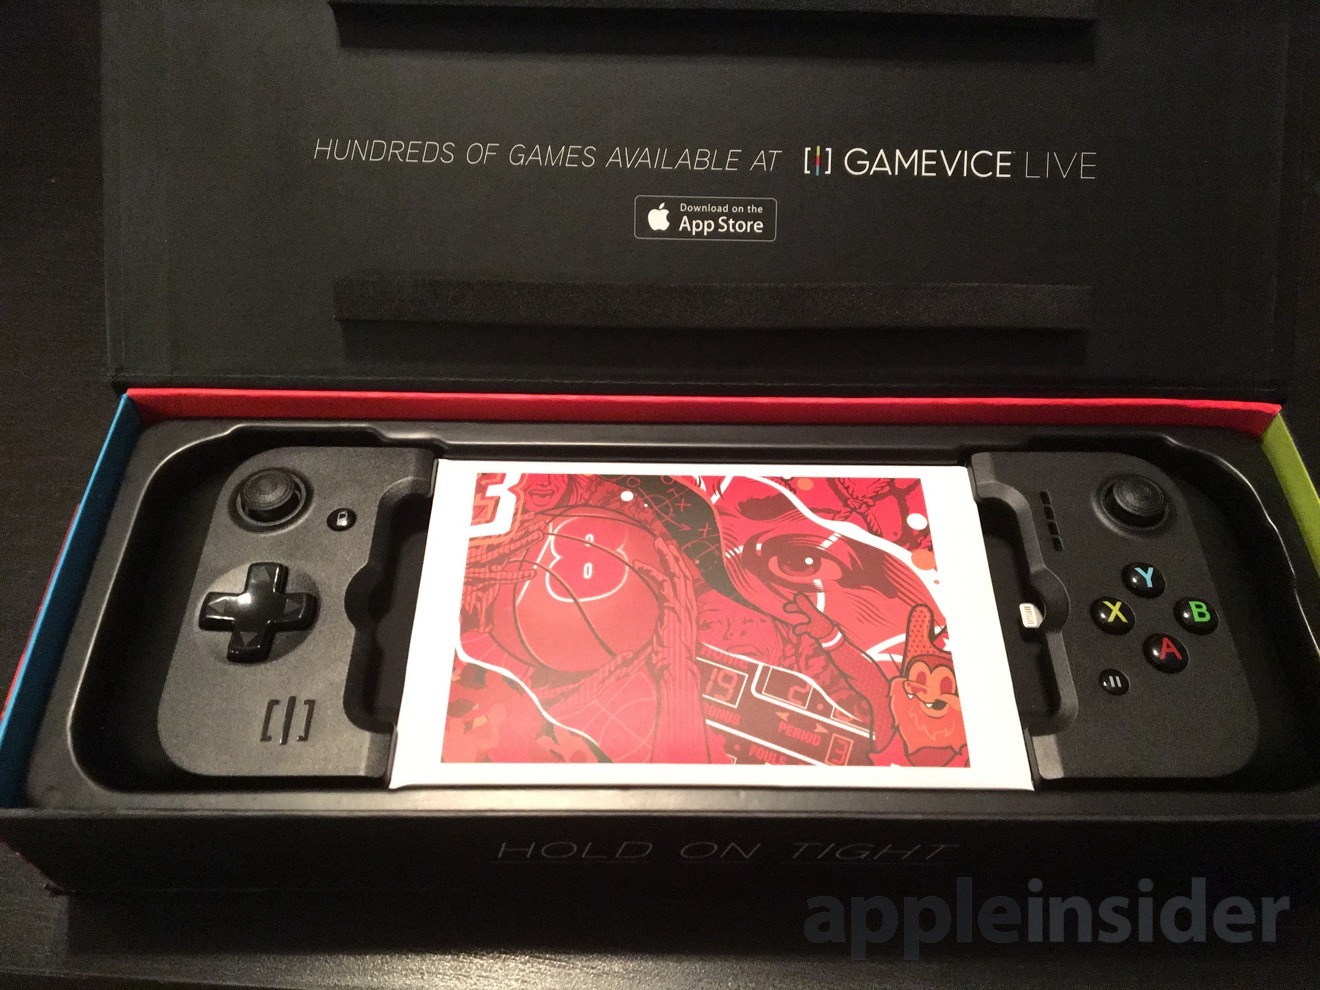 GAMEVICE Live